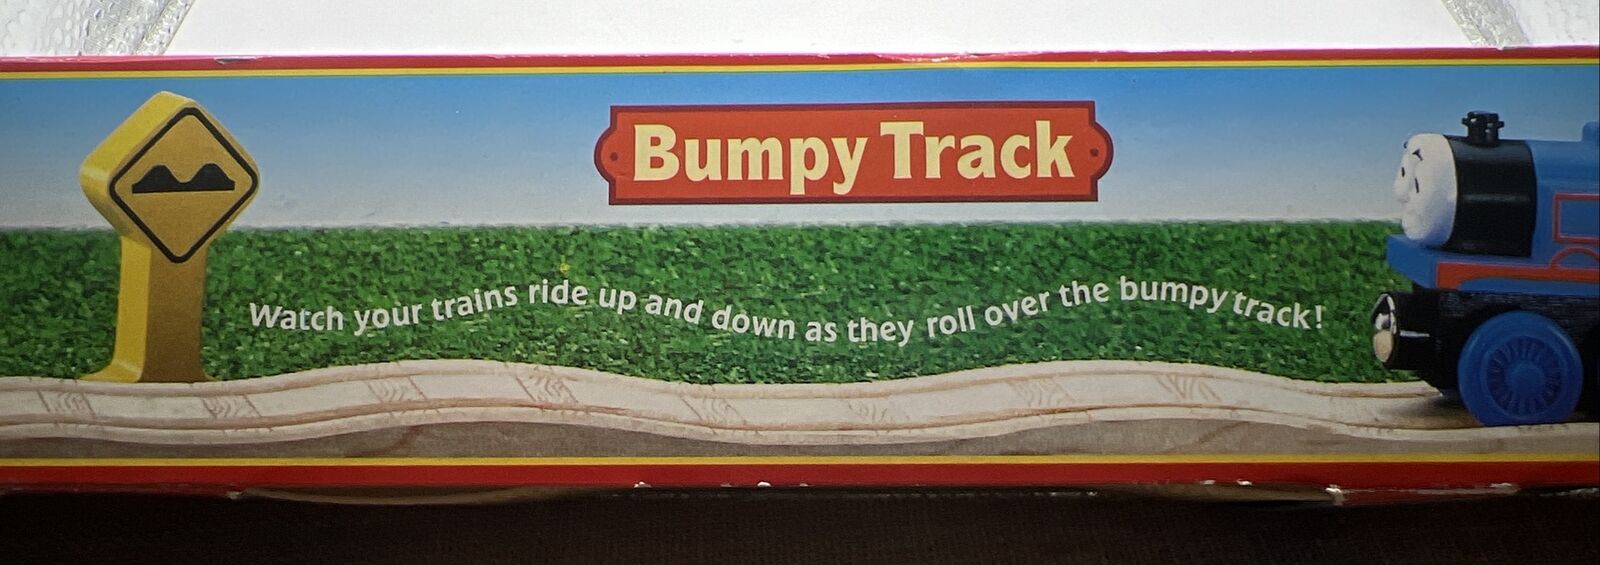 Thomas & Friends Wooden Railway Train 2 PIECES 12” BUMPY TRACK & SIGN 2005 NEW